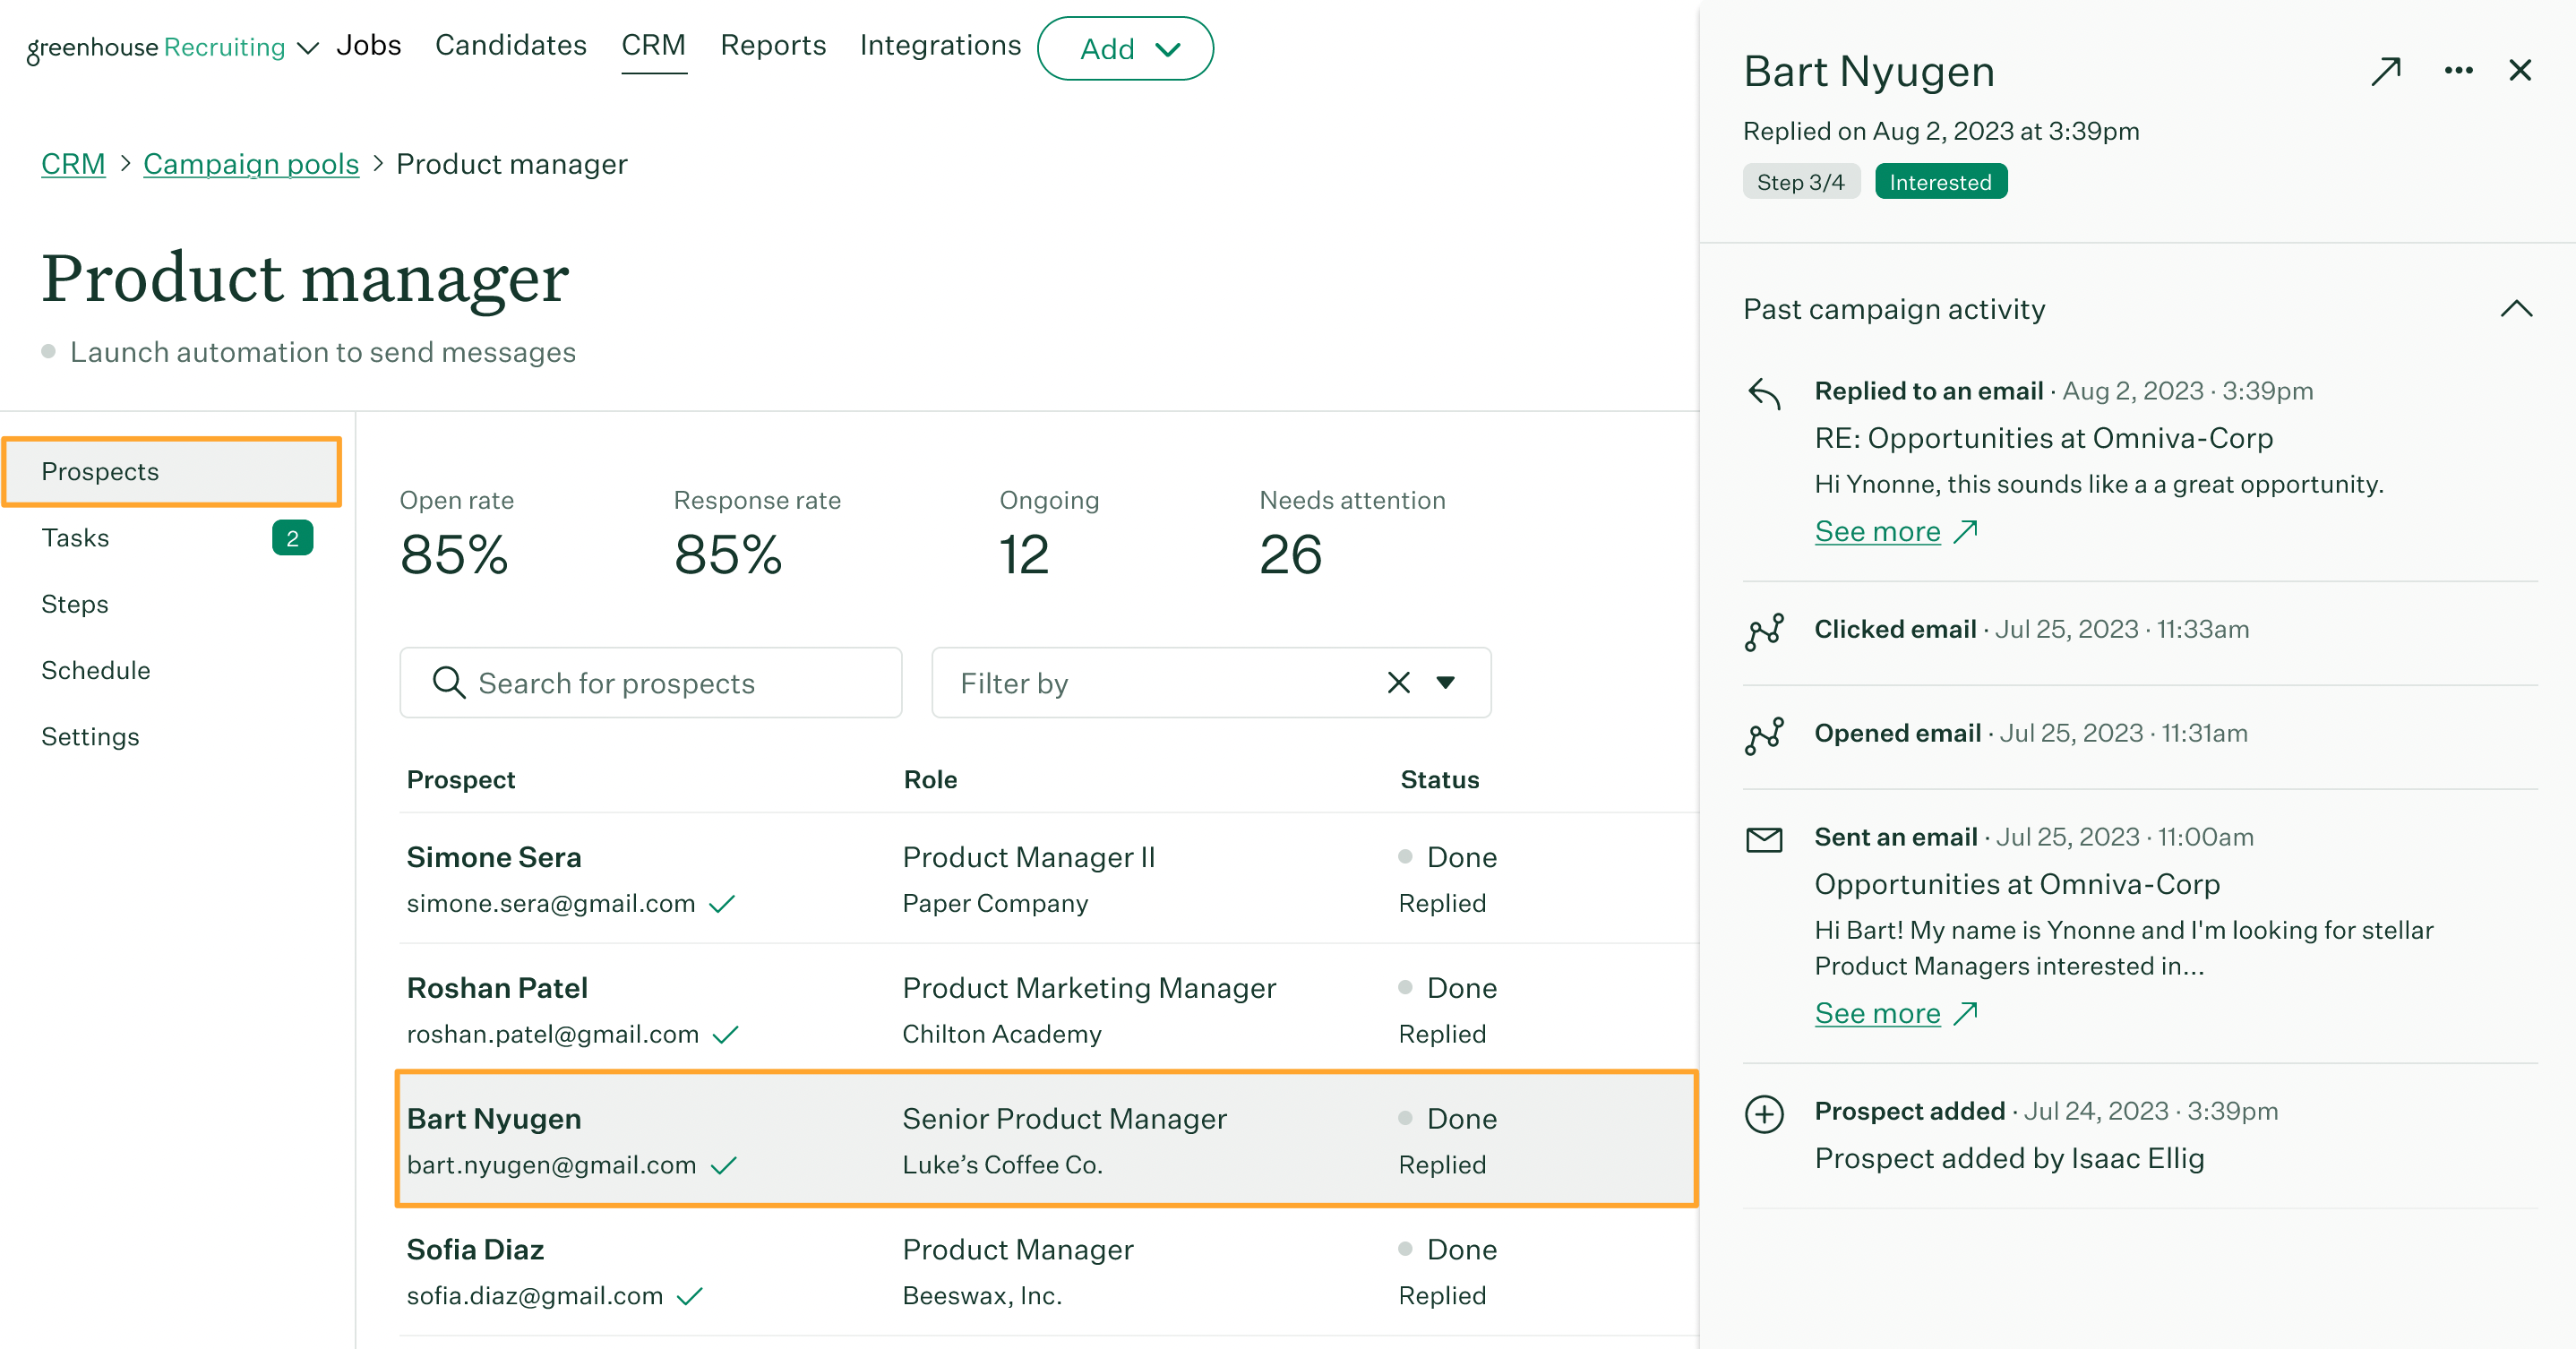 Product manager campaign pool page with prospect row highlighted and activity panel opened